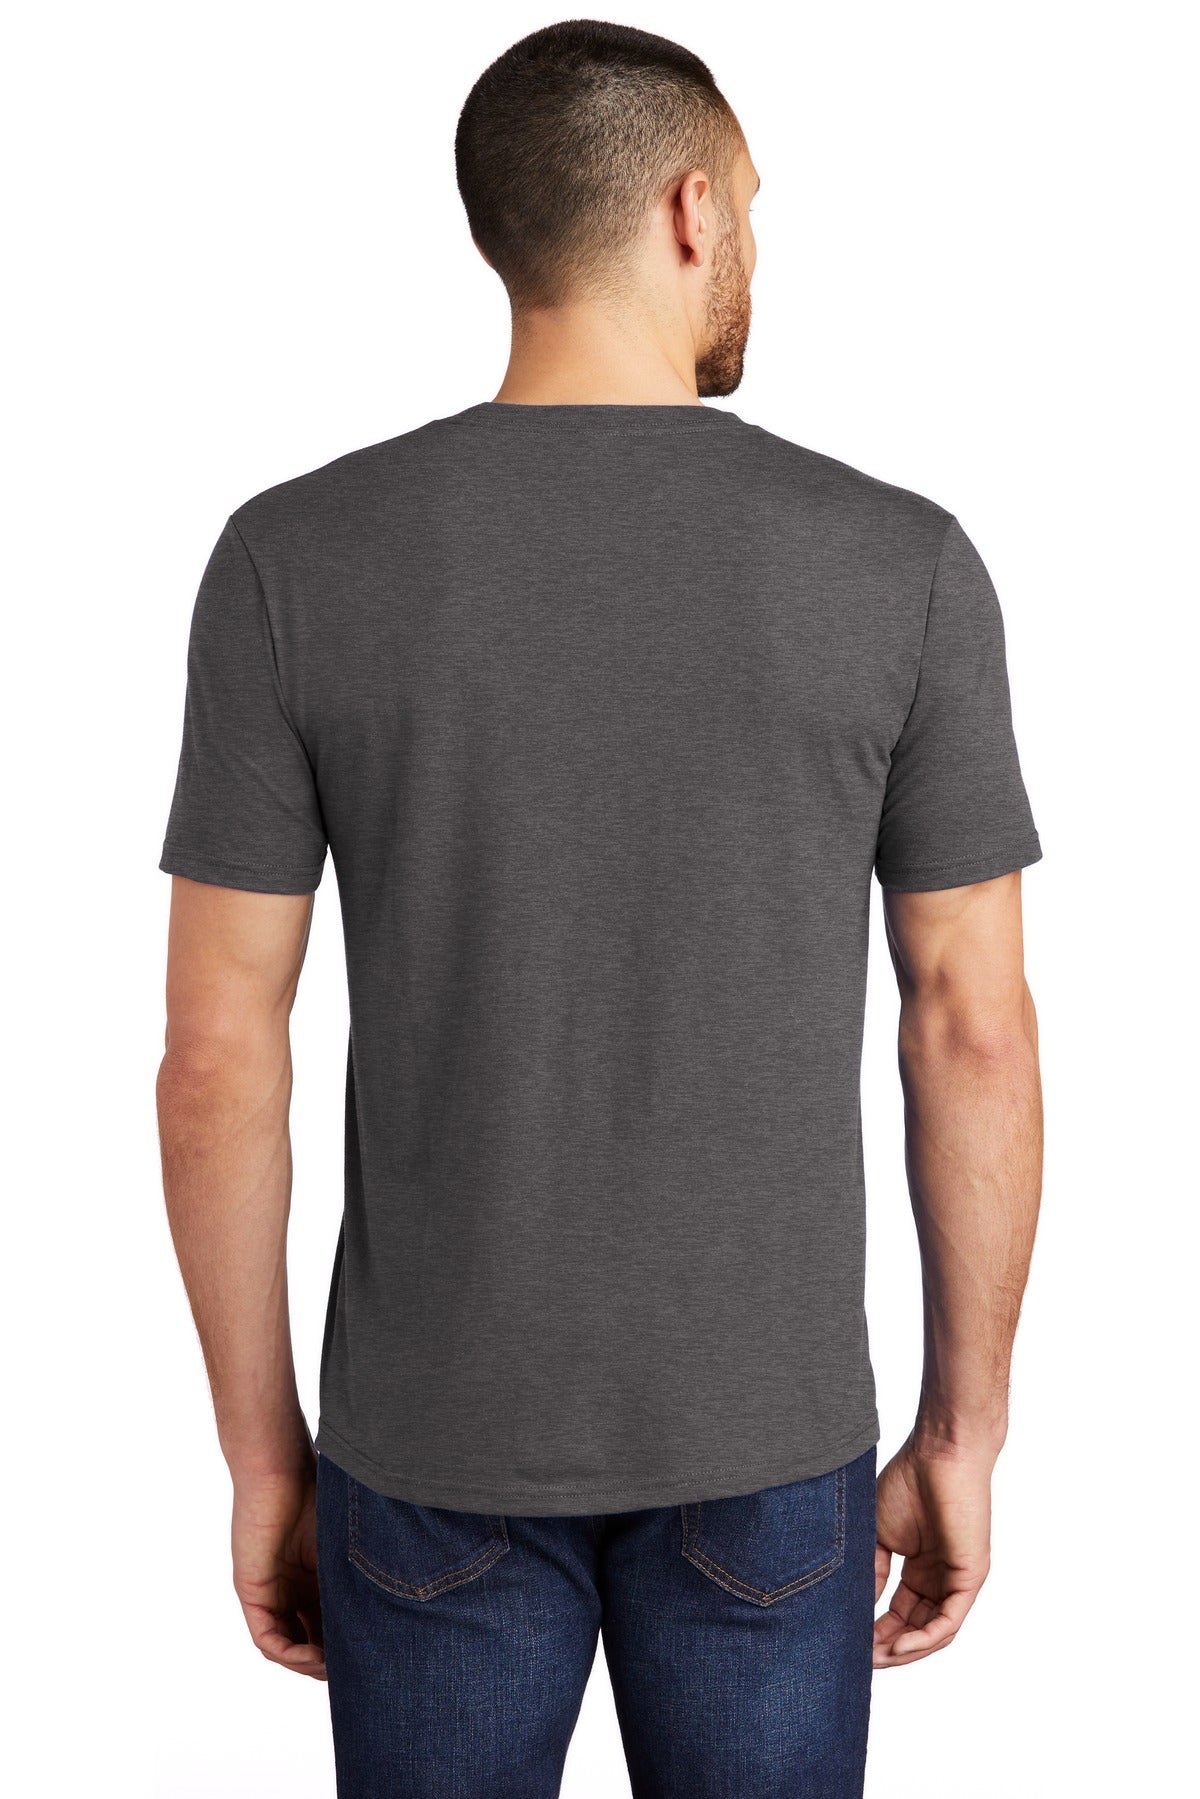 District ® Perfect Tri®Tee. DM130 [Heathered Charcoal] - DFW Impression